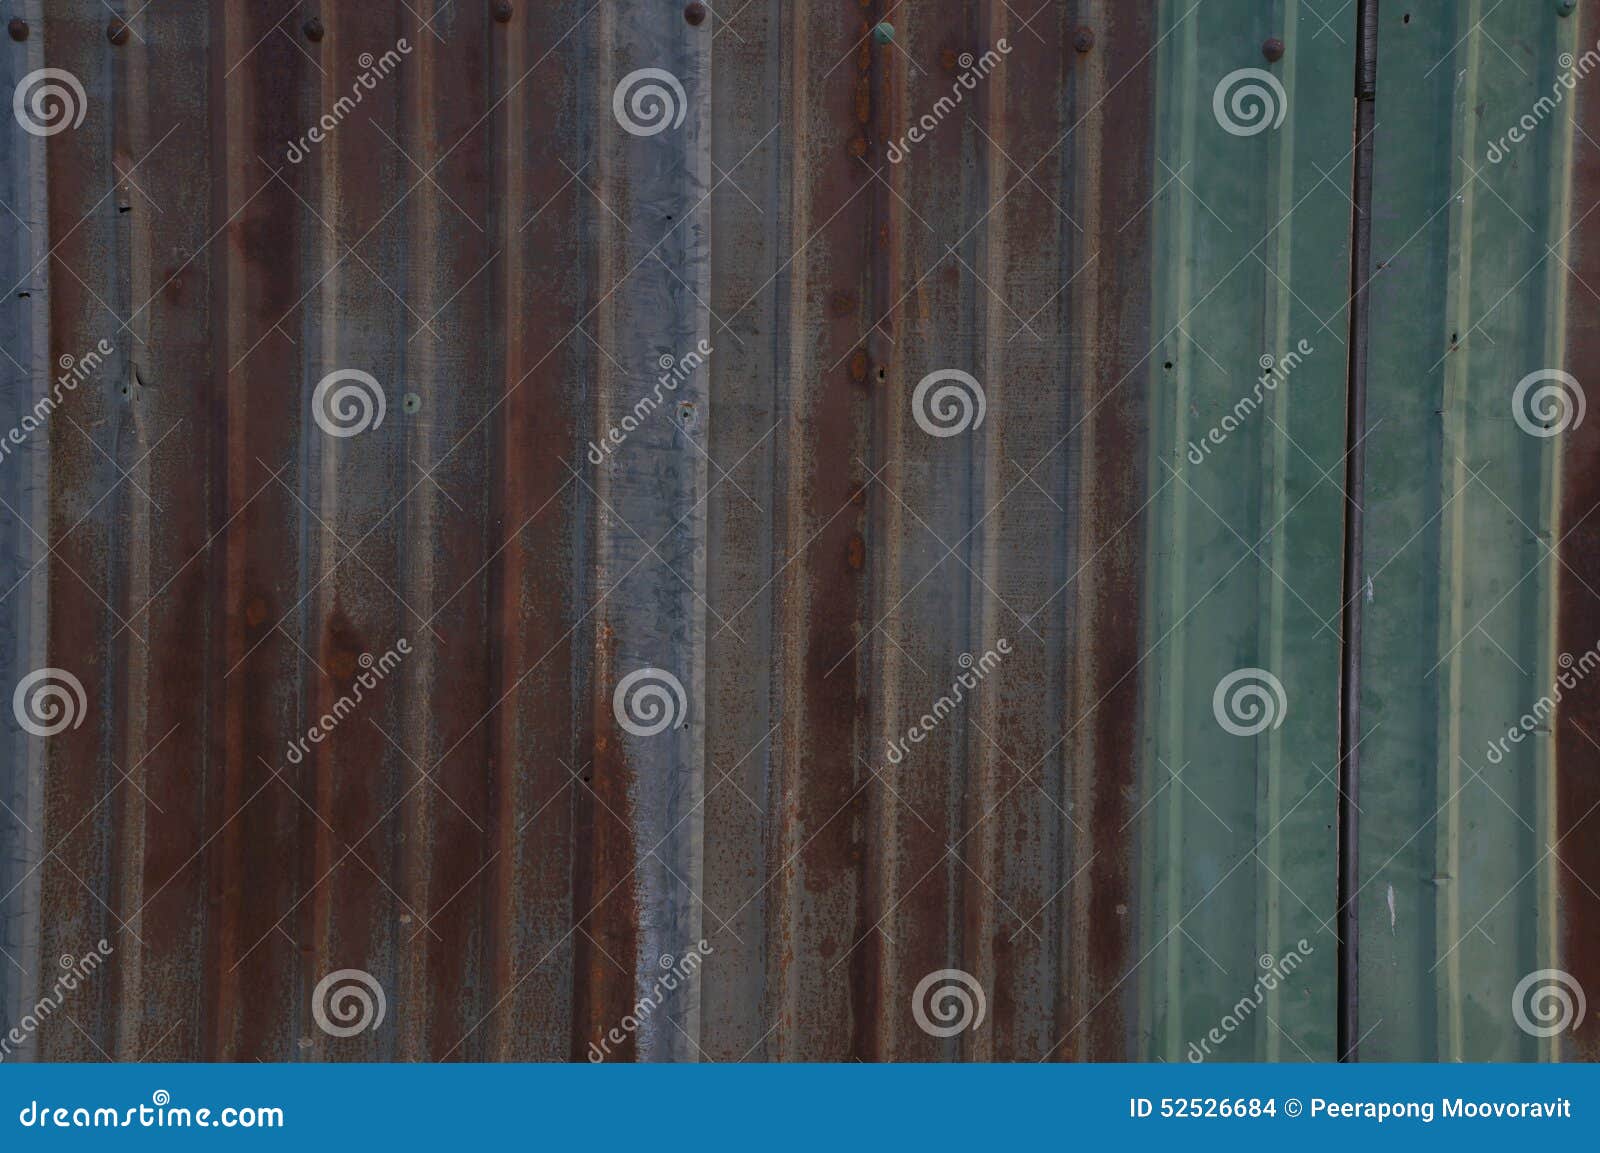 Metal Sheet Rust Wall Home House Rustic Concept Stock Photo Image of industry, pattern 52526684